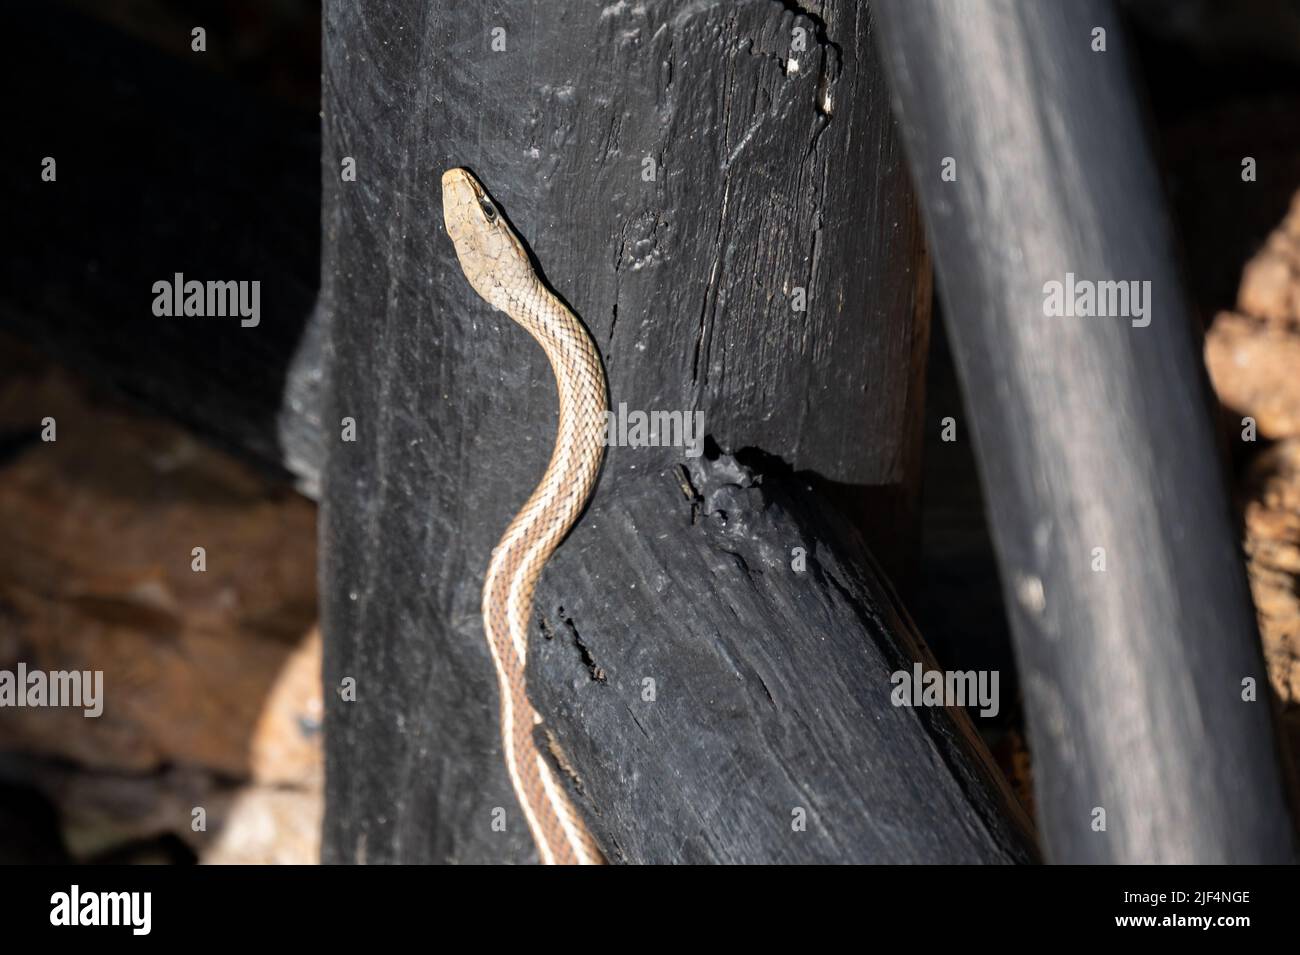 A snake crawls over wood in Namibia Africa Stock Photo